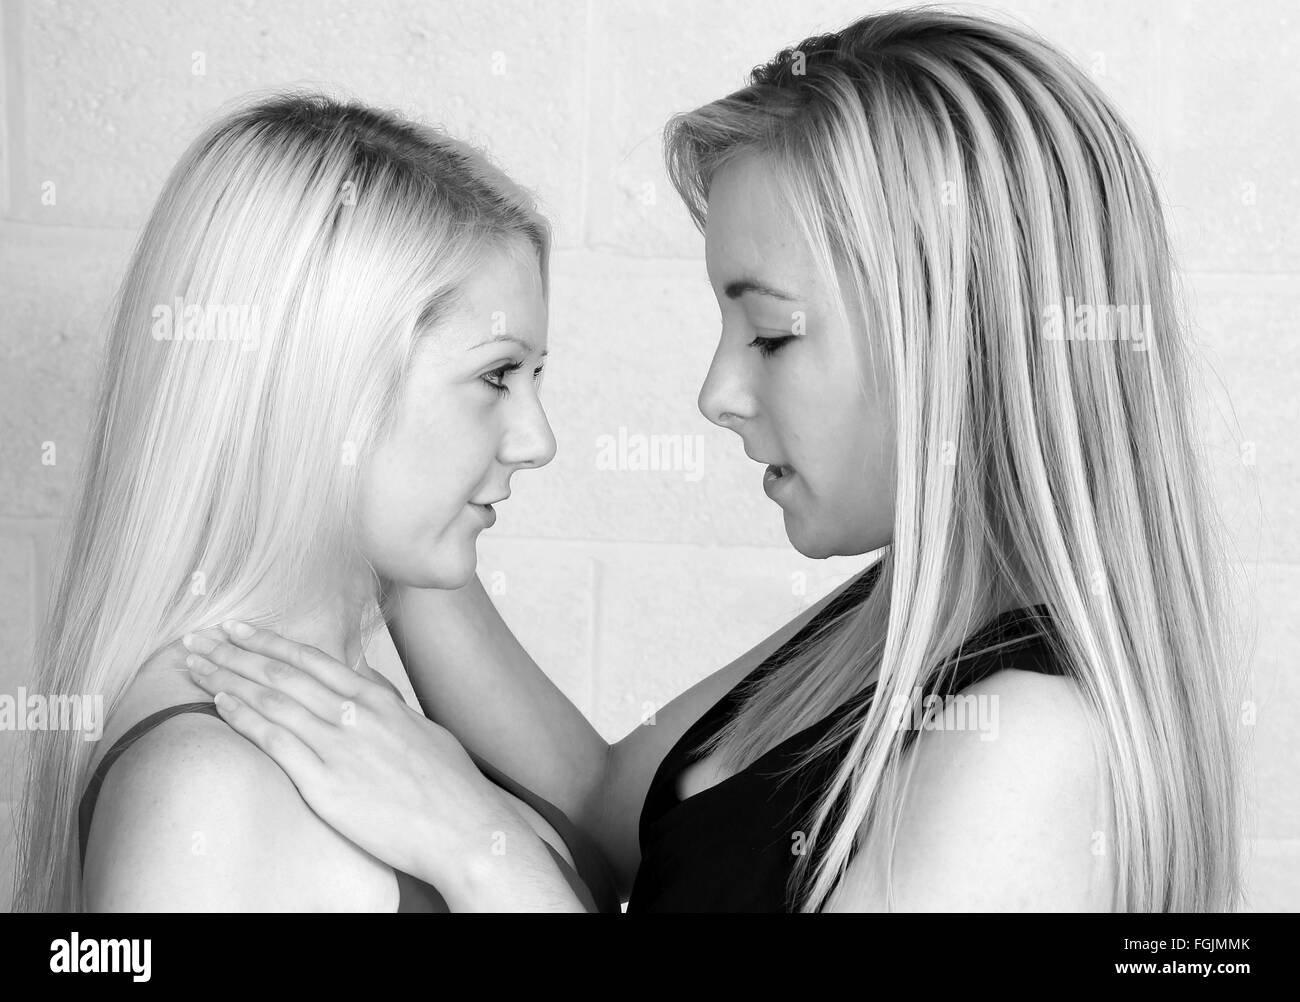 Two young women physically attracted to each other and getting passionate September 2015 Stock Photo